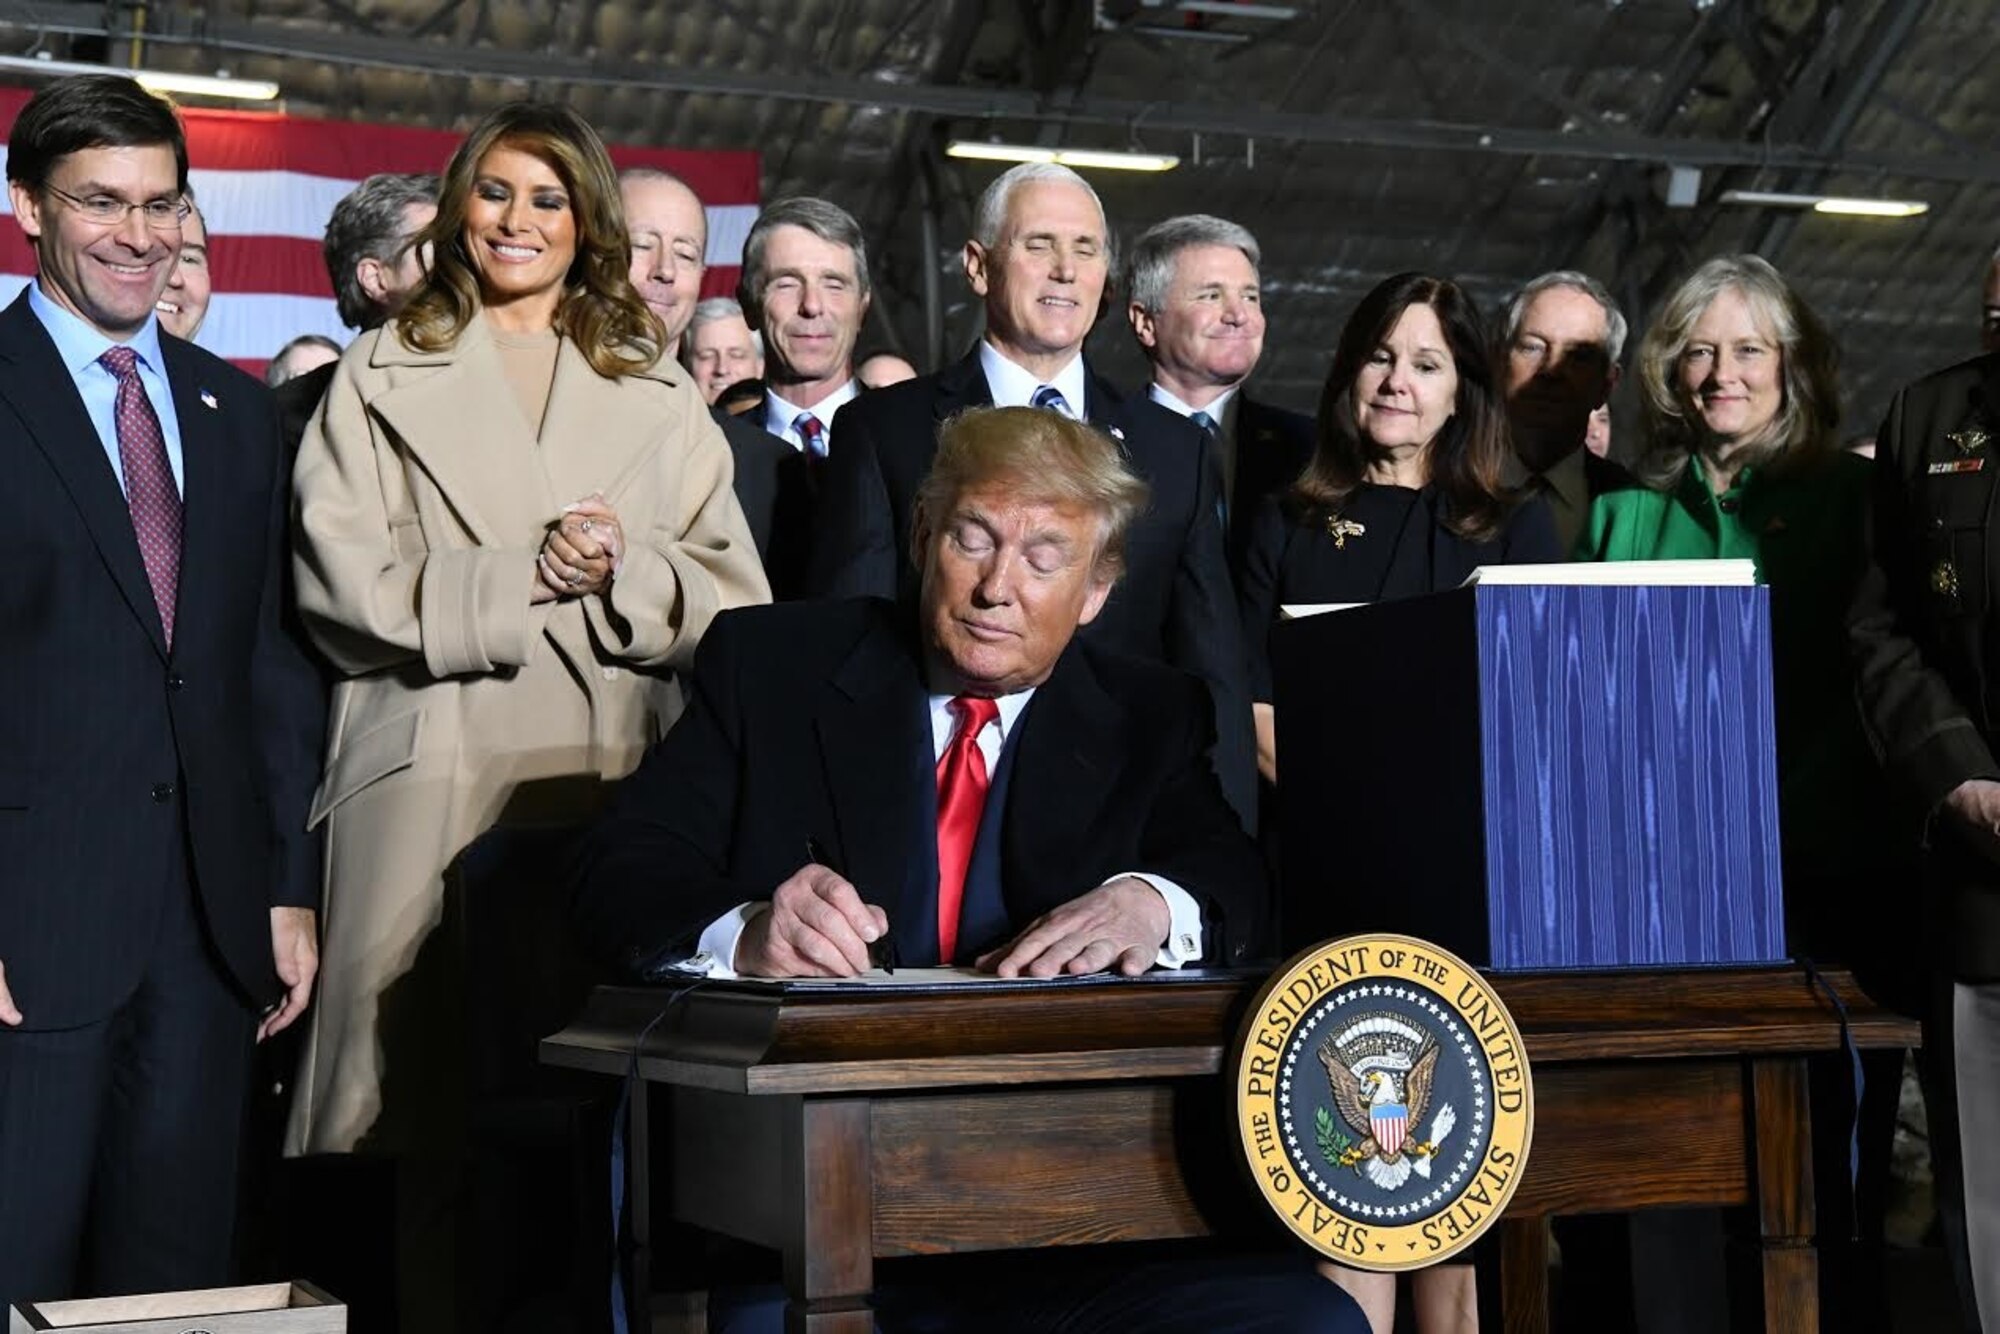 President Donald Trump signs S.1790, the National Defense Authorization Act for Fiscal Year 2020 as senior leaders look on, Friday, Dec. 20, 2019, at Joint Base Andrews, MAryland. The act authorizes a budget that supports the U.S. armed forces and postures the Air Force to meet the requirements of the National Defense Strategy.